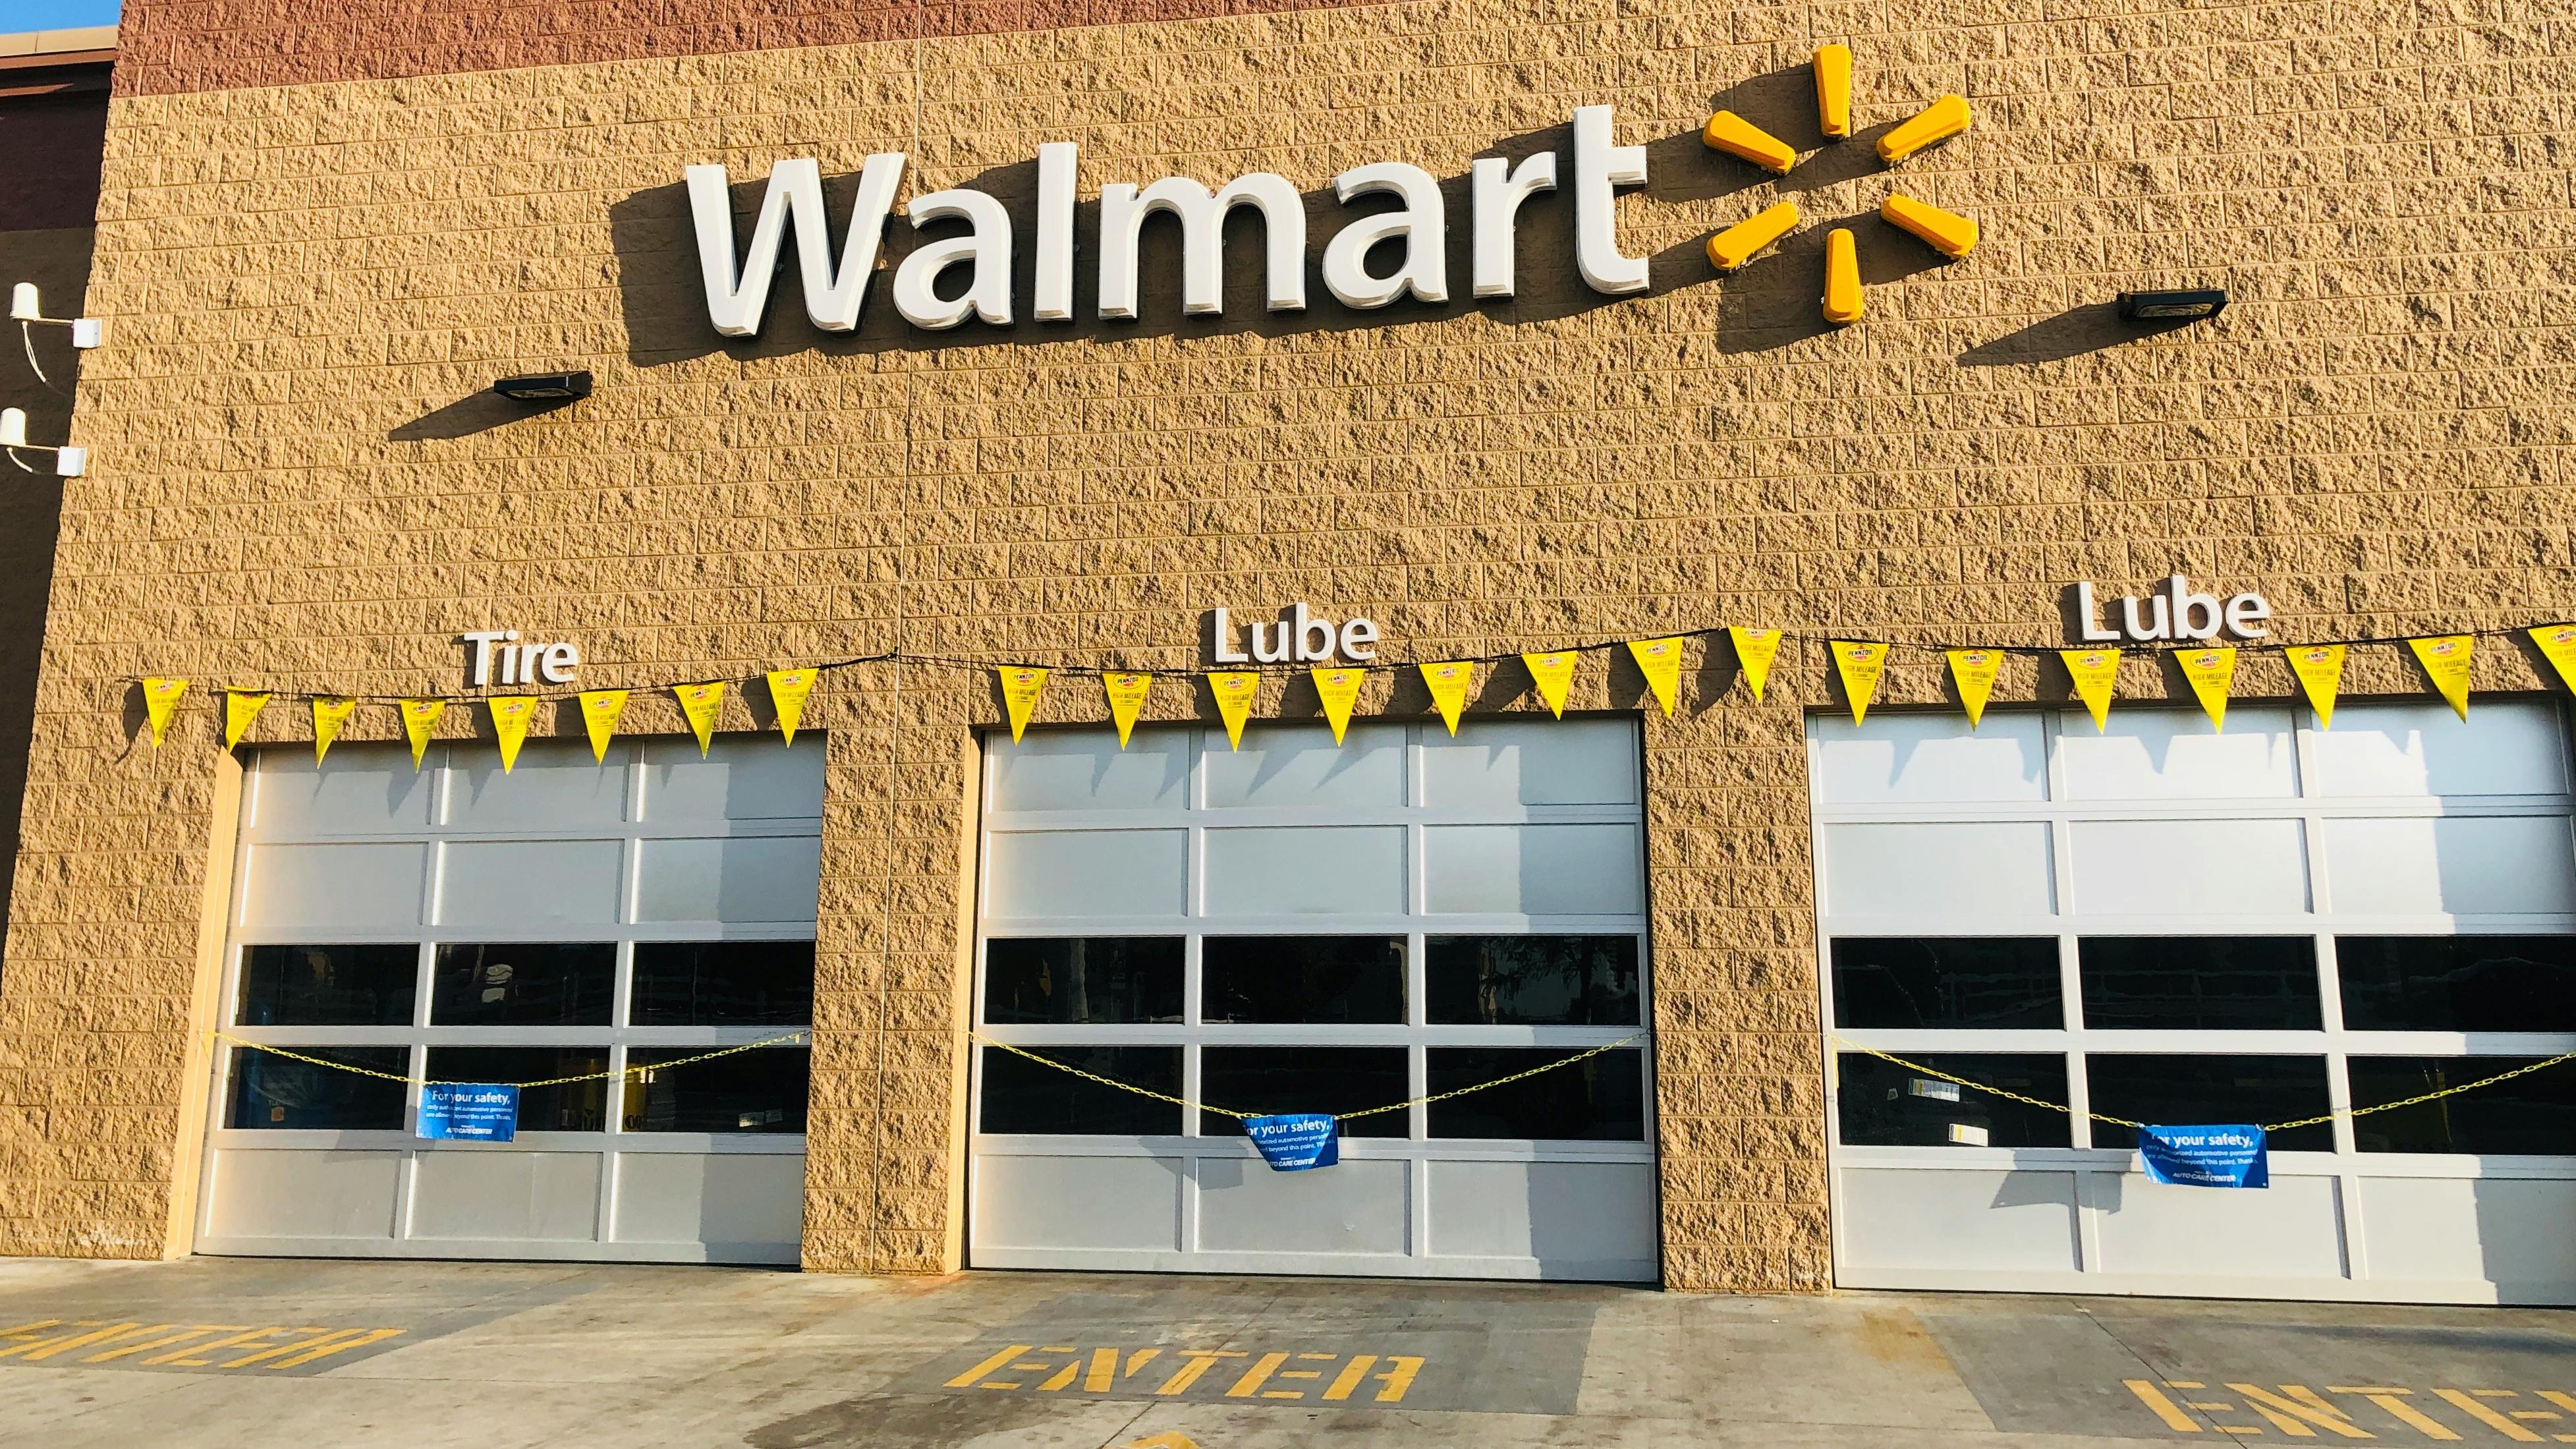 How Much Is An Oil Change At Walmart In 2022? (Guide)